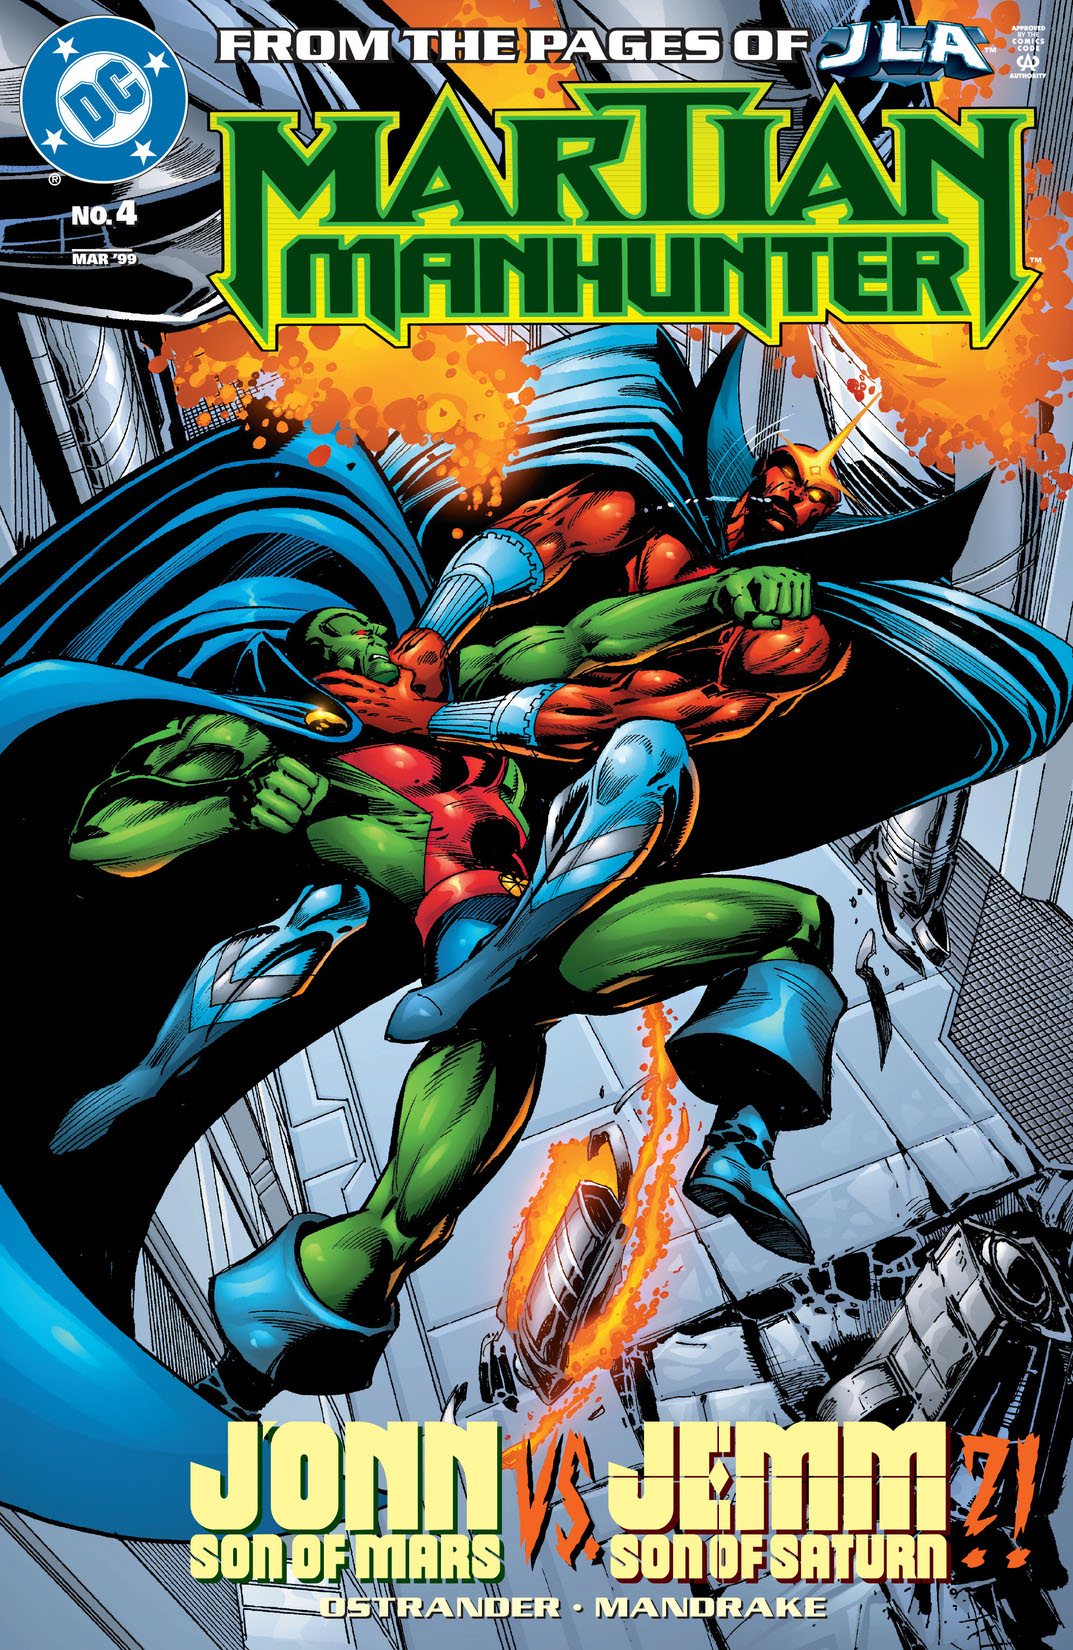 Martian Manhunter (1998-) #4 preview images